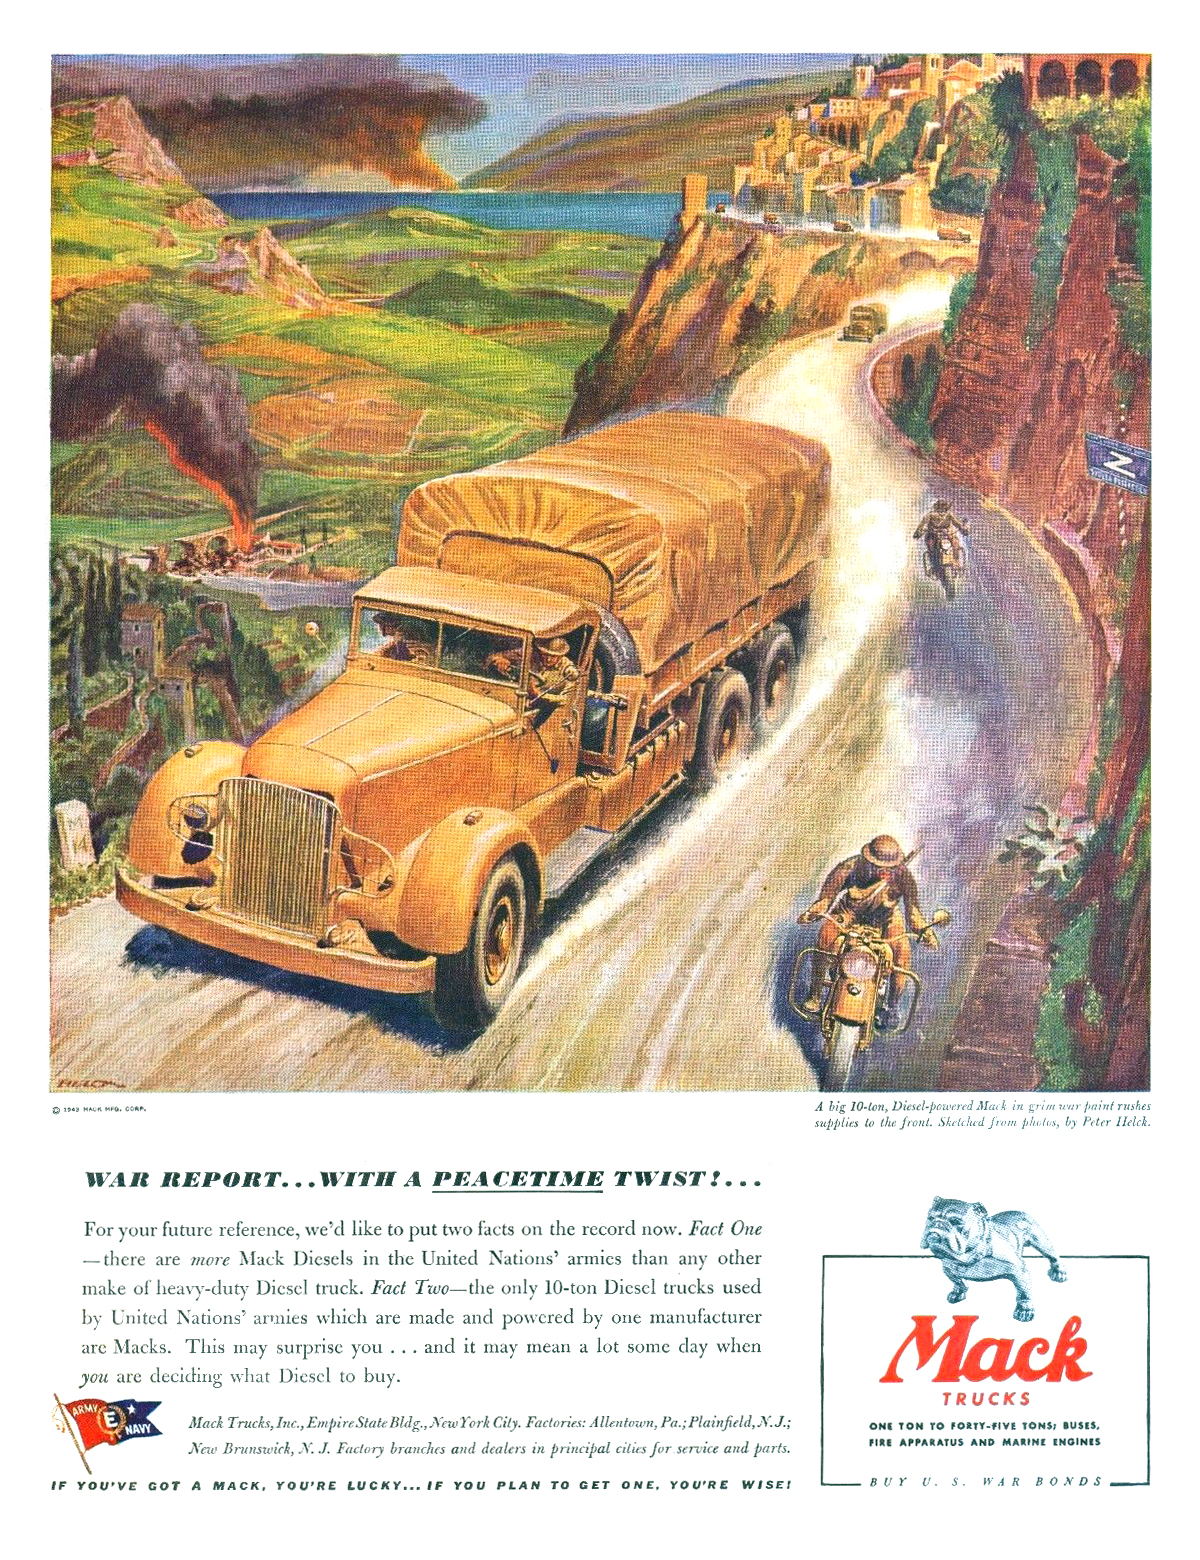 Mack Trucks Ad (September, 1943): War Report... With a Peacetime Twist!... - Illustrated by Peter Helck